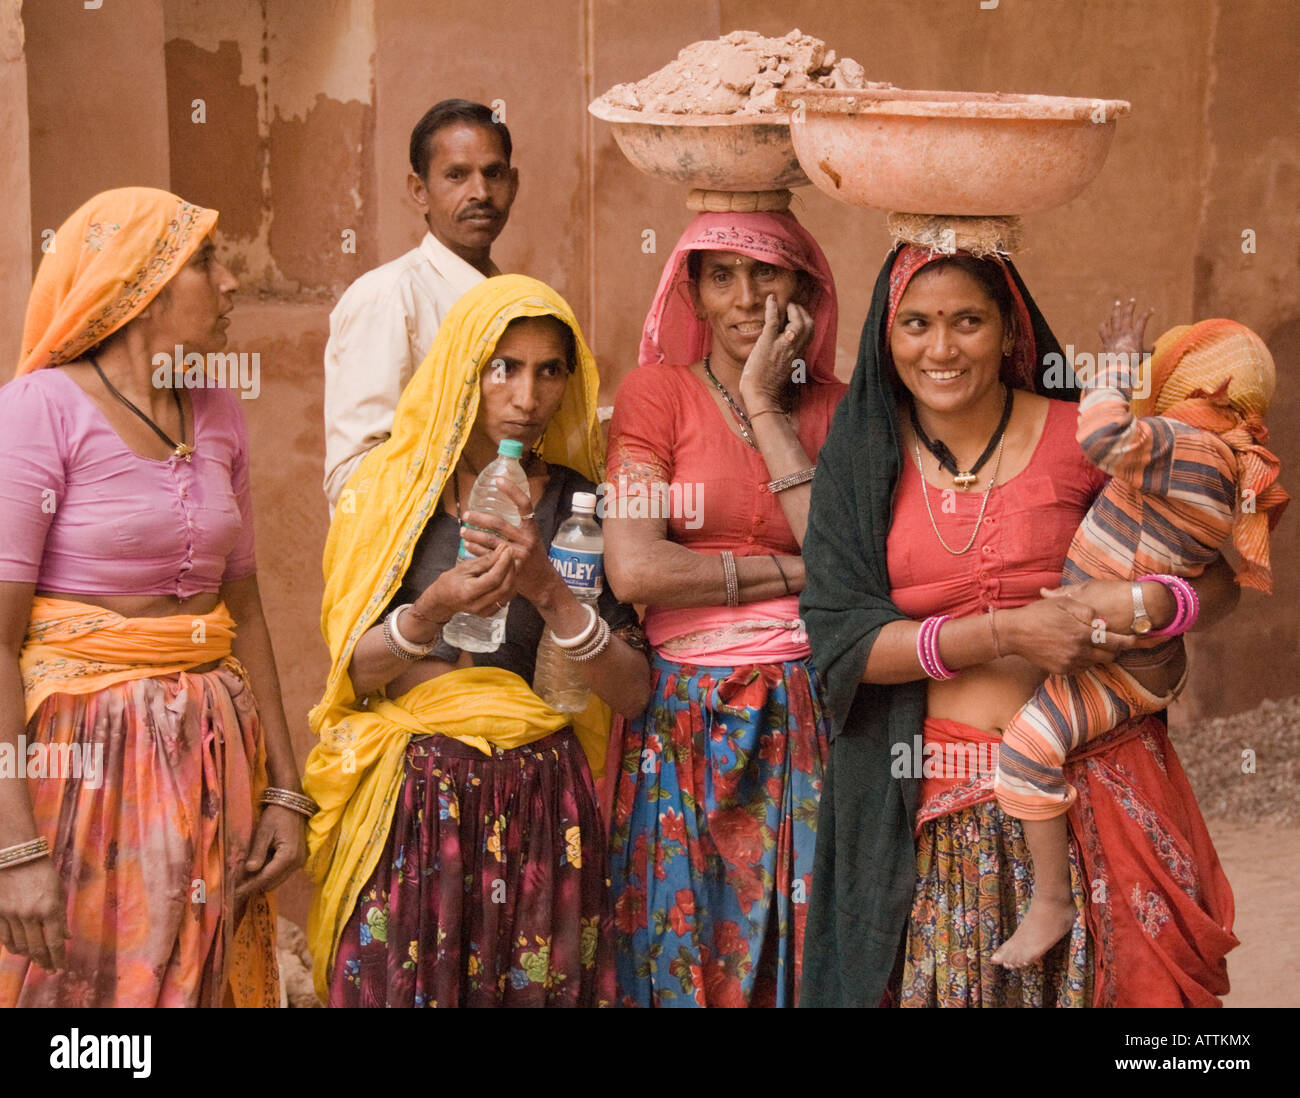 Group portrait of four women, a man and a baby at a worksite in Jaipur, Rajasthan, India Stock Photo